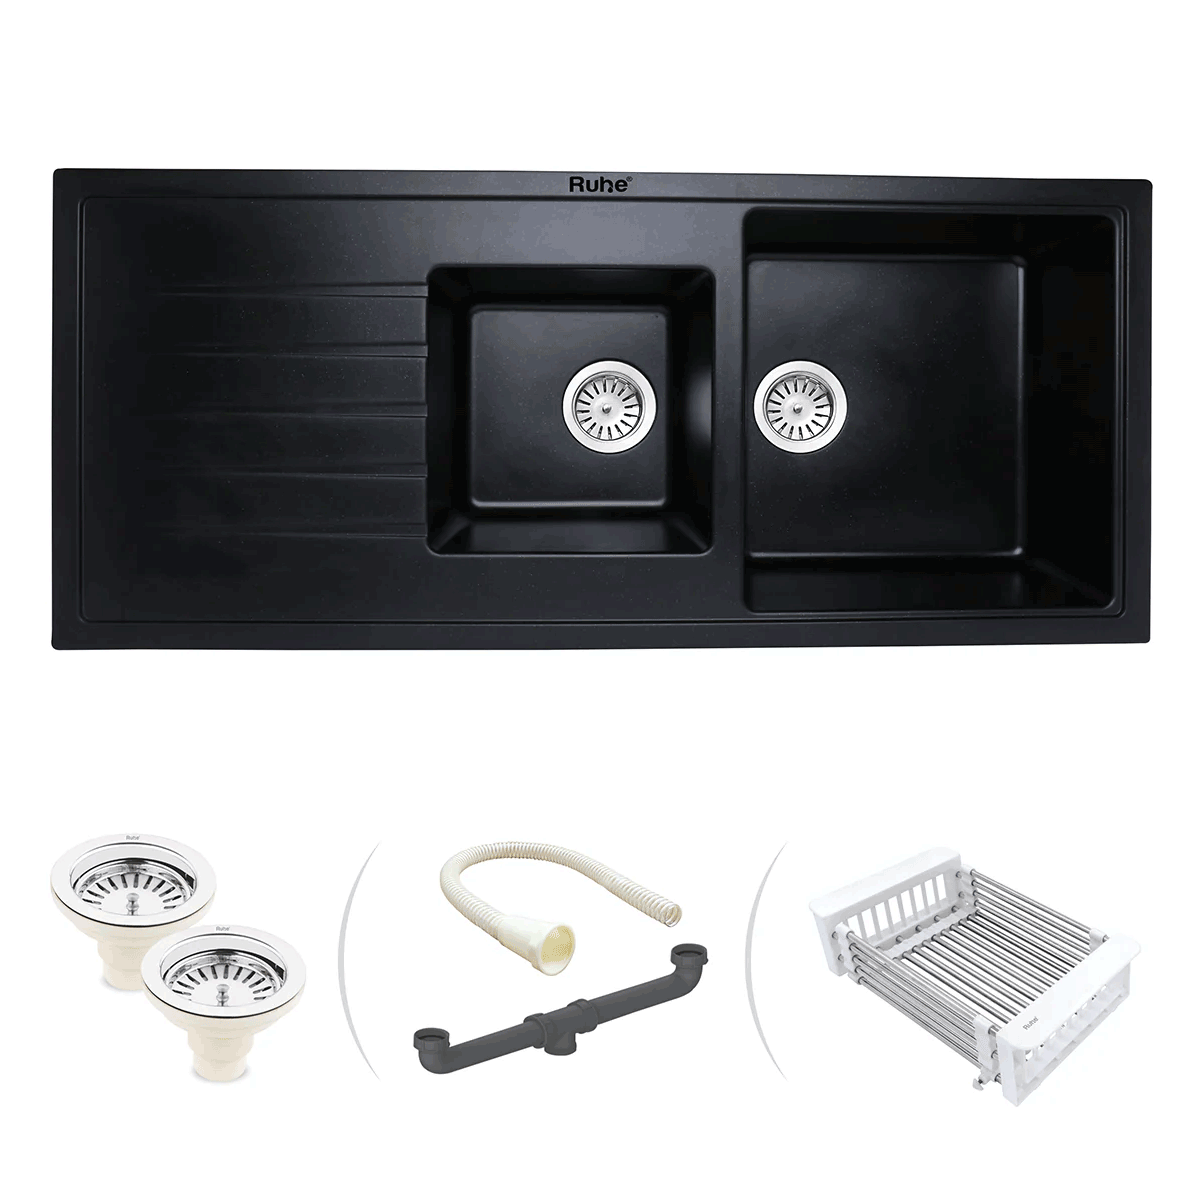 Quartz Double Bowl with Drainboard Kitchen Sink - Matte Black (45 x 20 x 9 inches) - by Ruhe®